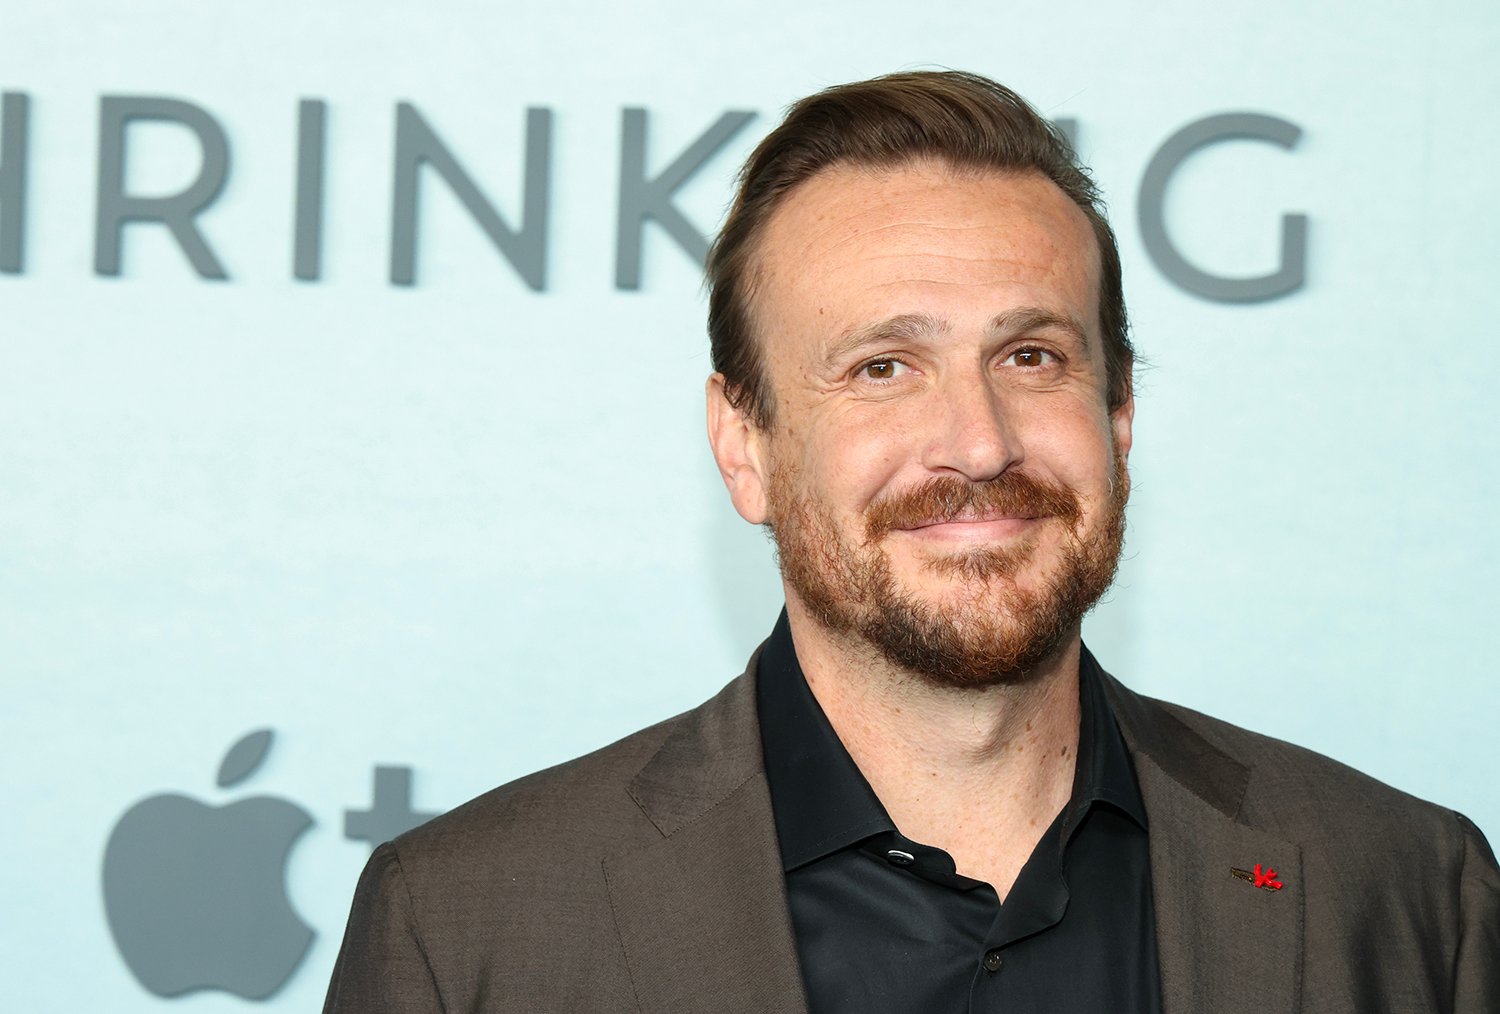 How I Met Your Mother star Jason Segel poses at the premiere of AppleTV+'s Shrinking